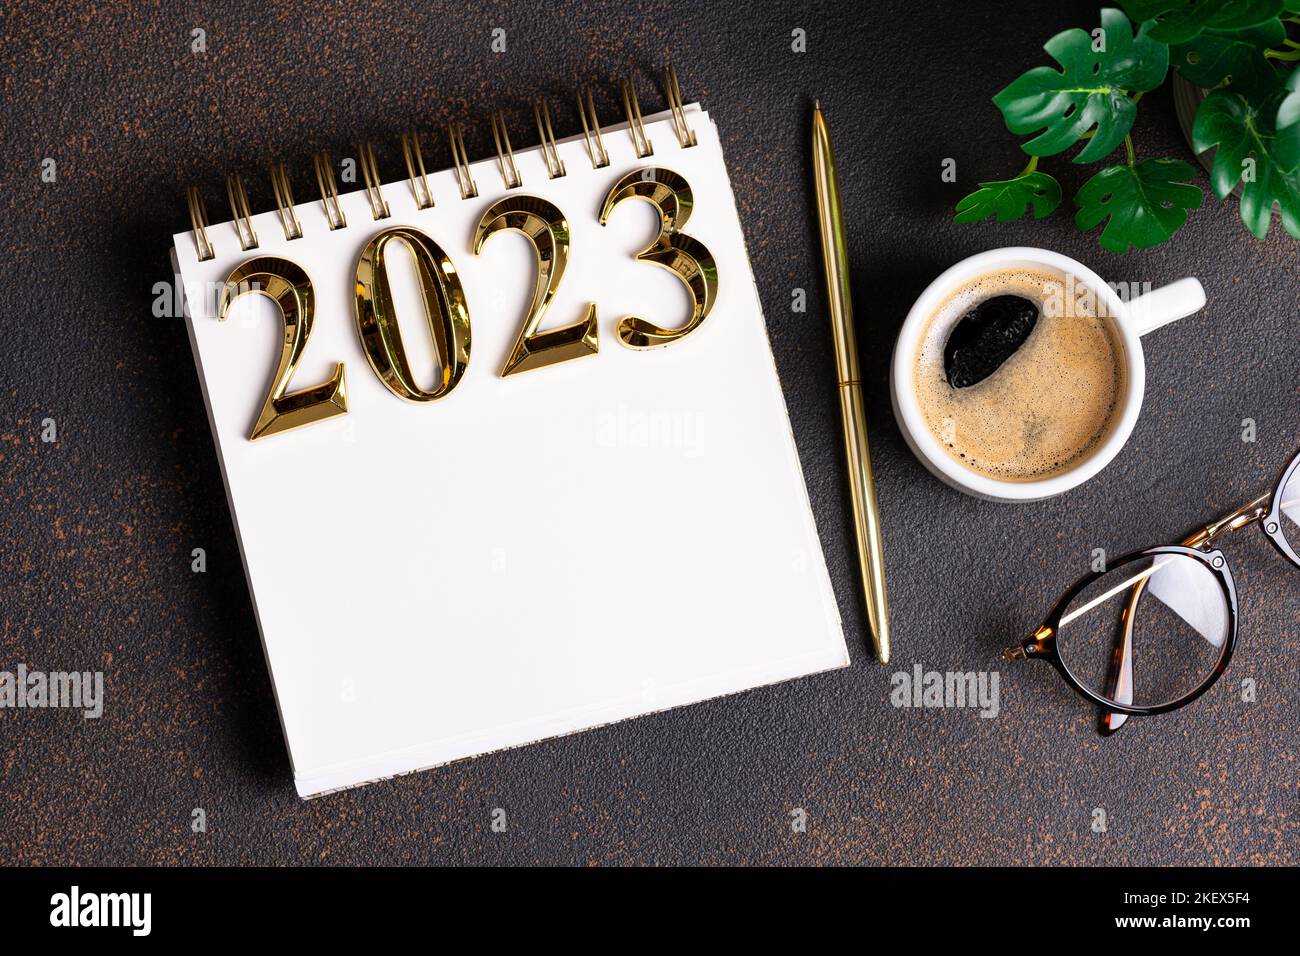 New year resolutions 2023 on desk. 2023 resolutions list with notebook, coffee cup on table. Goals, resolutions, plan, action, checklist concept. New Stock Photo